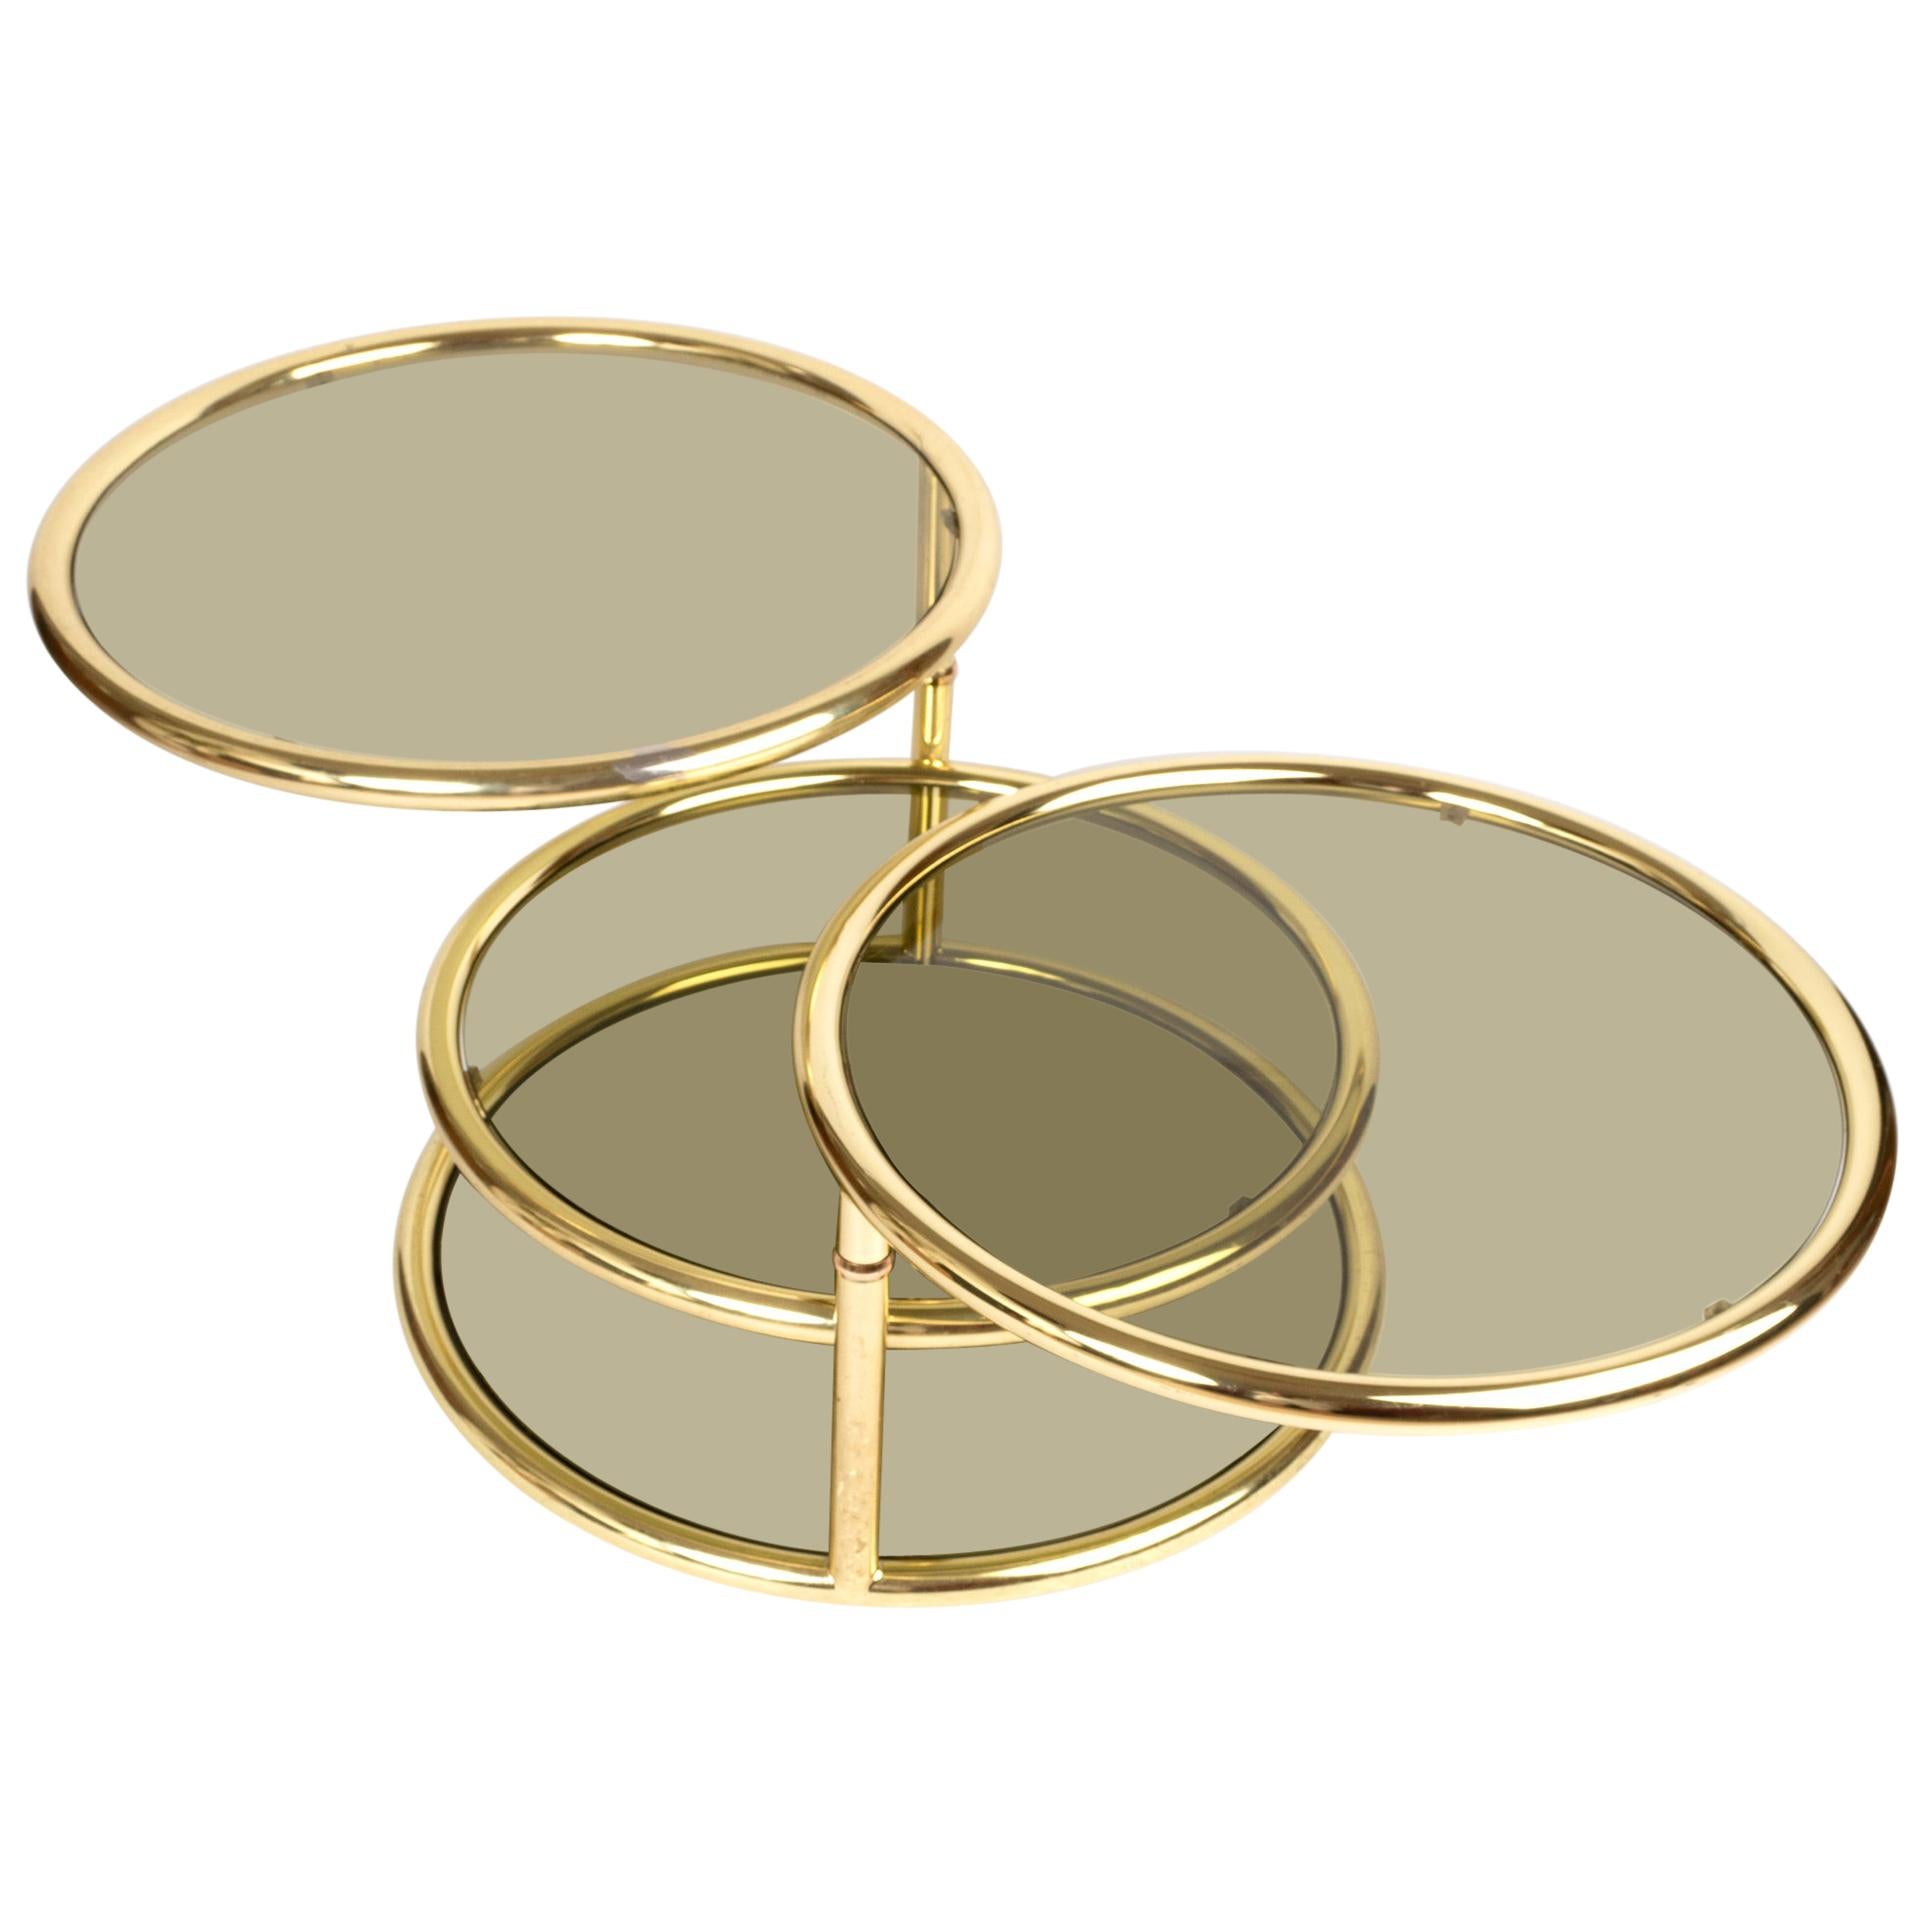 Midcentury Circular Brass Swivel Tiered Coffee Cocktail Table, attributed to DIA For Sale